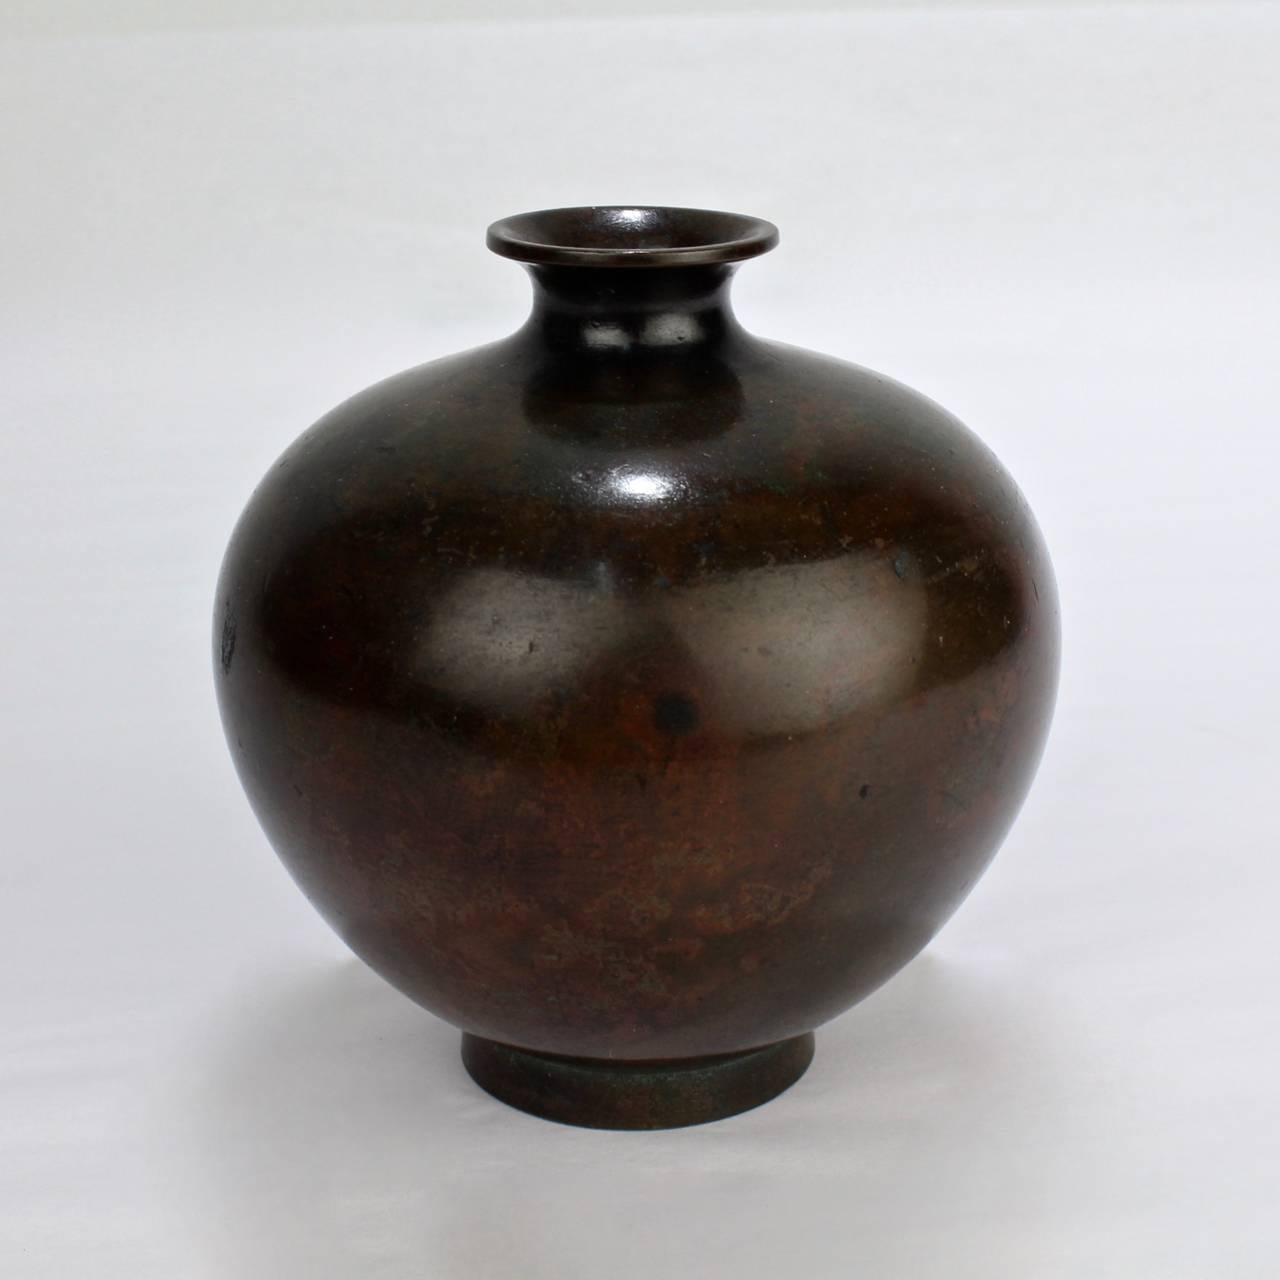 A diminutive, antique Meiji Period Japanese bronze vase.

Of bulbous form and flared mouth supported by a round foot.

With fine mottled patina.

Height: circa 3 3/4 in.

Items purchased from David Sterner antiques must delight you.